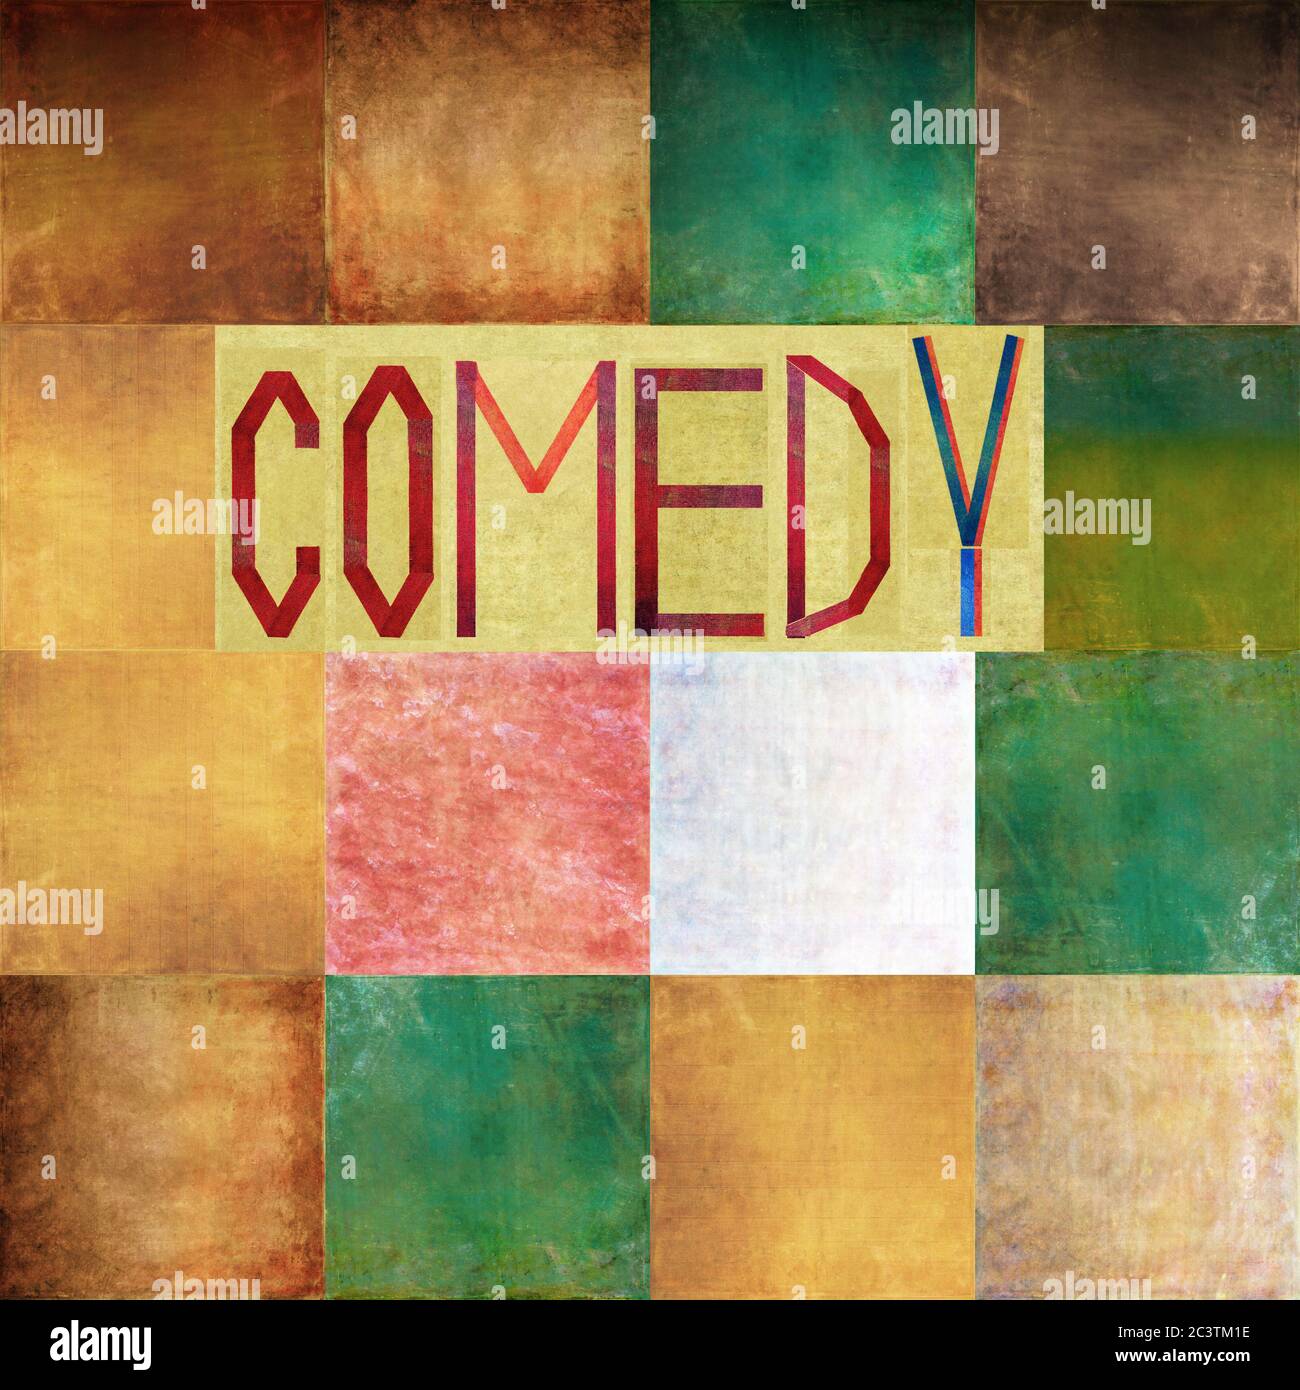 Textured background image and useful design element displaying the word 'Comedy' Stock Photo